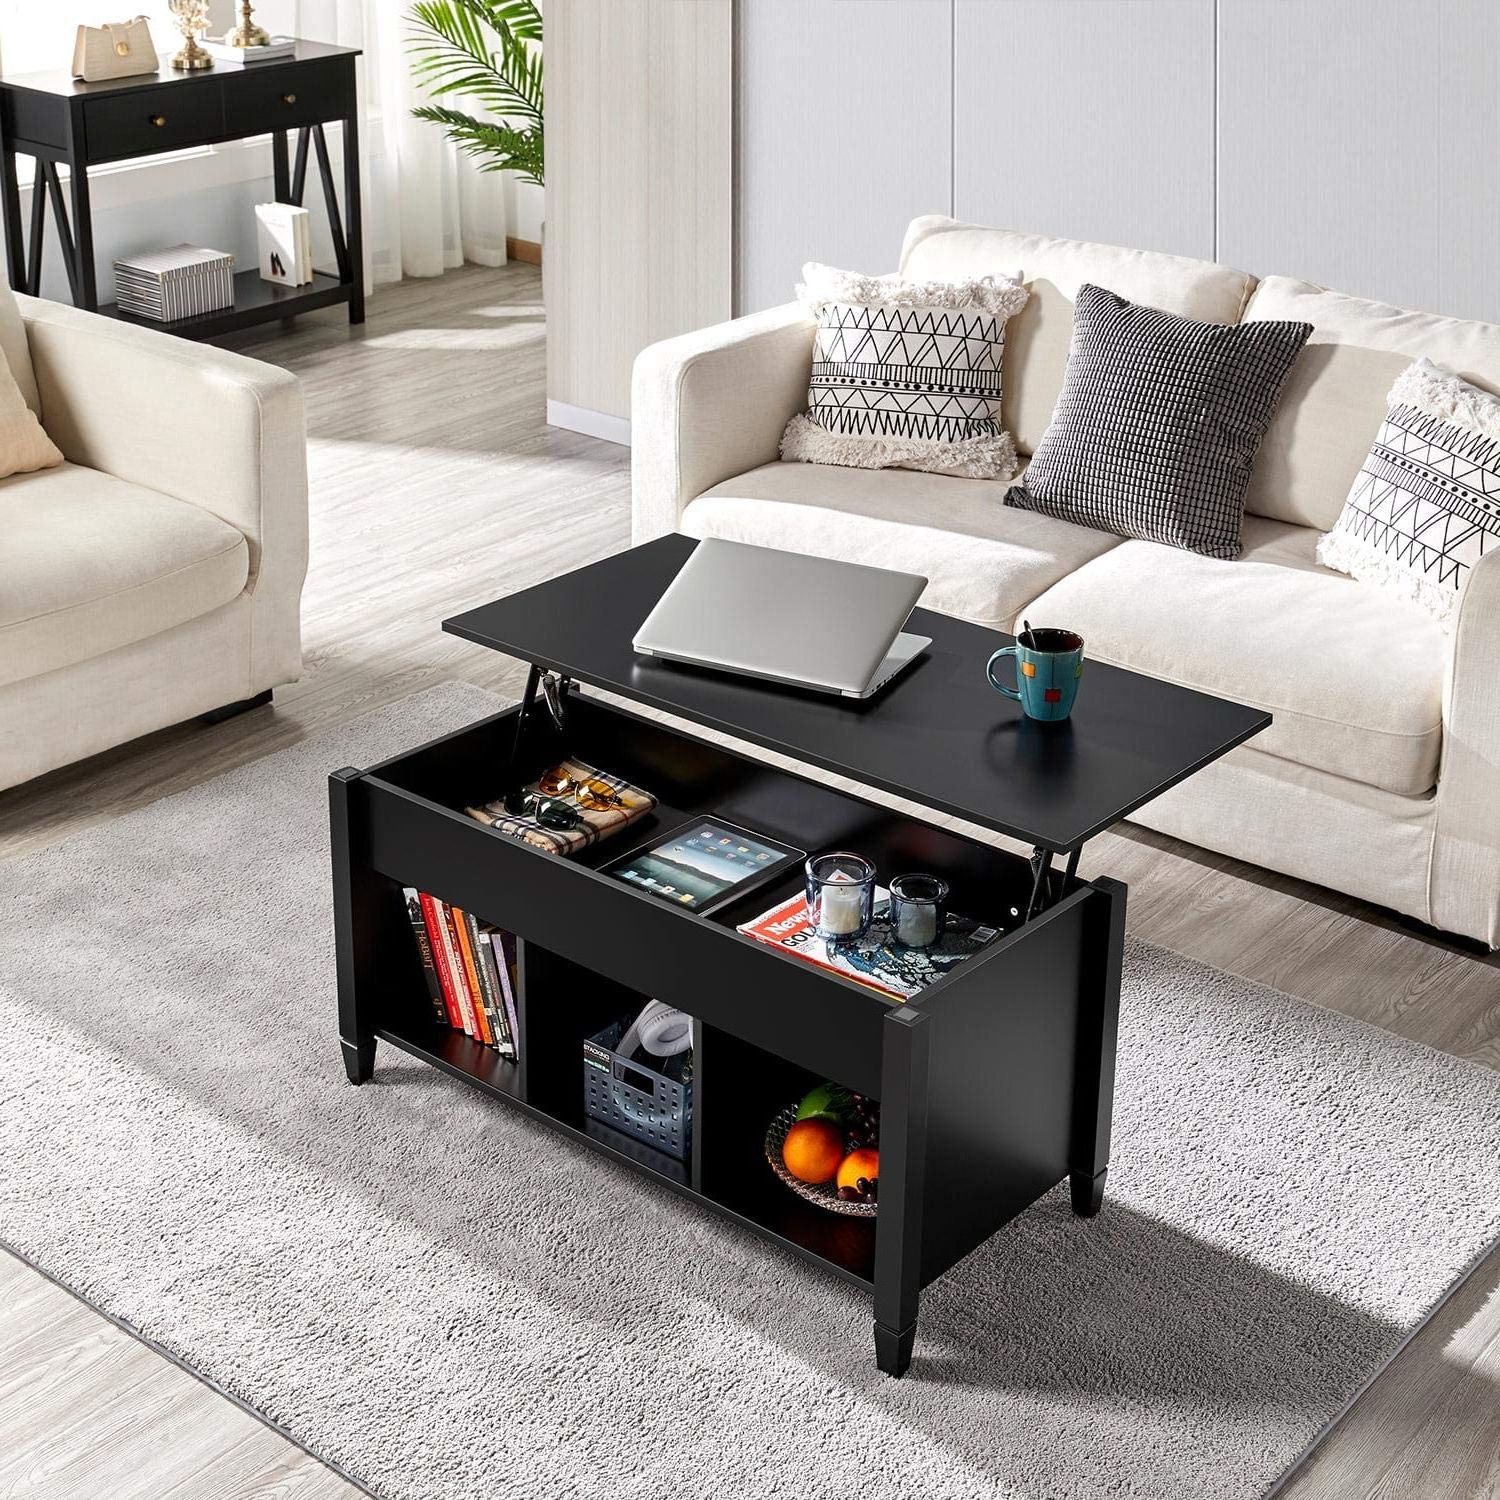 Zimtown Lift Up Top Coffee Table With Hidden Compartment End Rectangle Table  Storage Space Living Room Furniture (black) – Walmart Intended For Favorite Coffee Tables With Compartment (View 6 of 20)